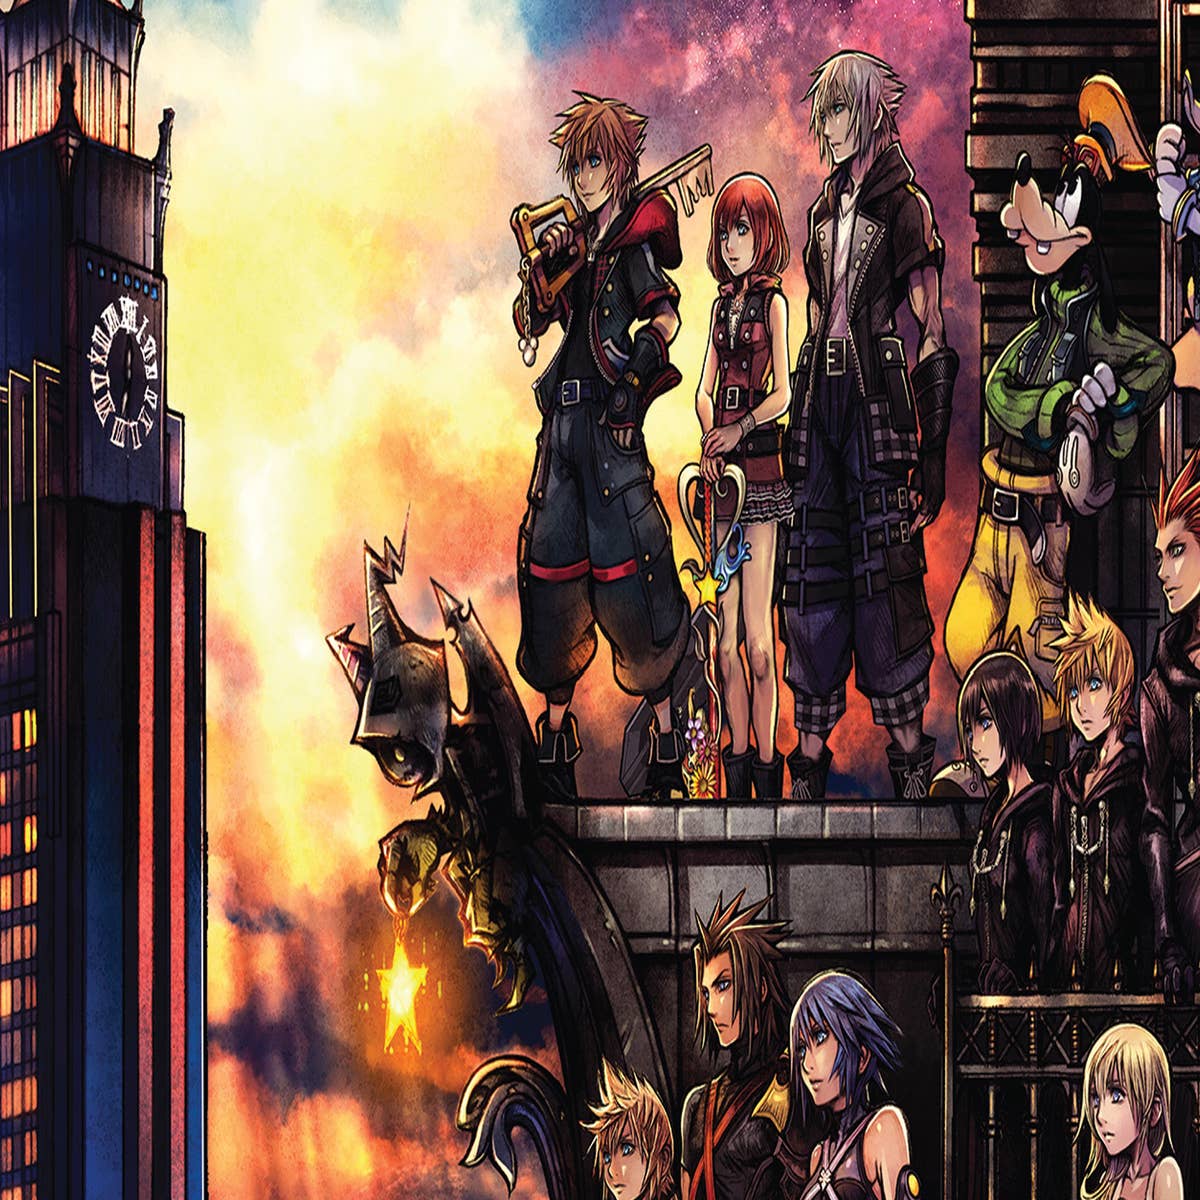 KH3] I cleaned up the KH3 PS4 Theme image. : r/KingdomHearts